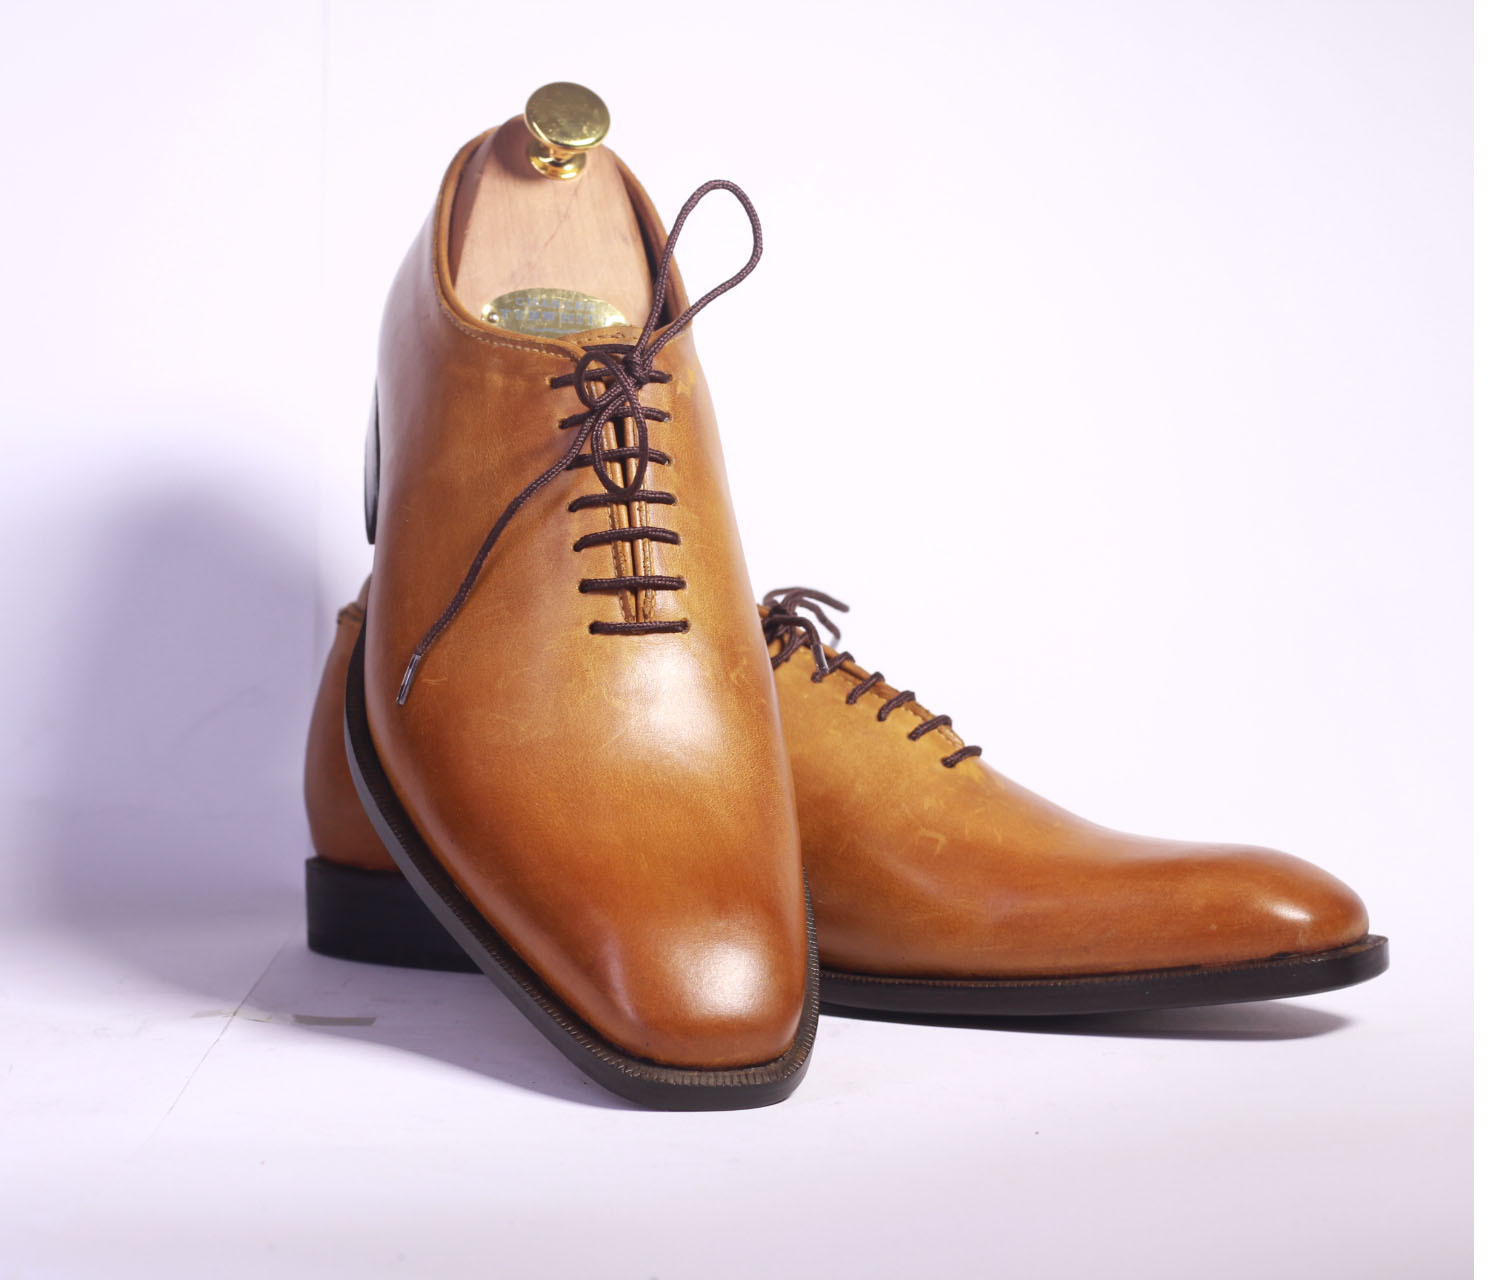 Handmade Mens Tan Leather Lace Up Dress Formal Shoes, Men